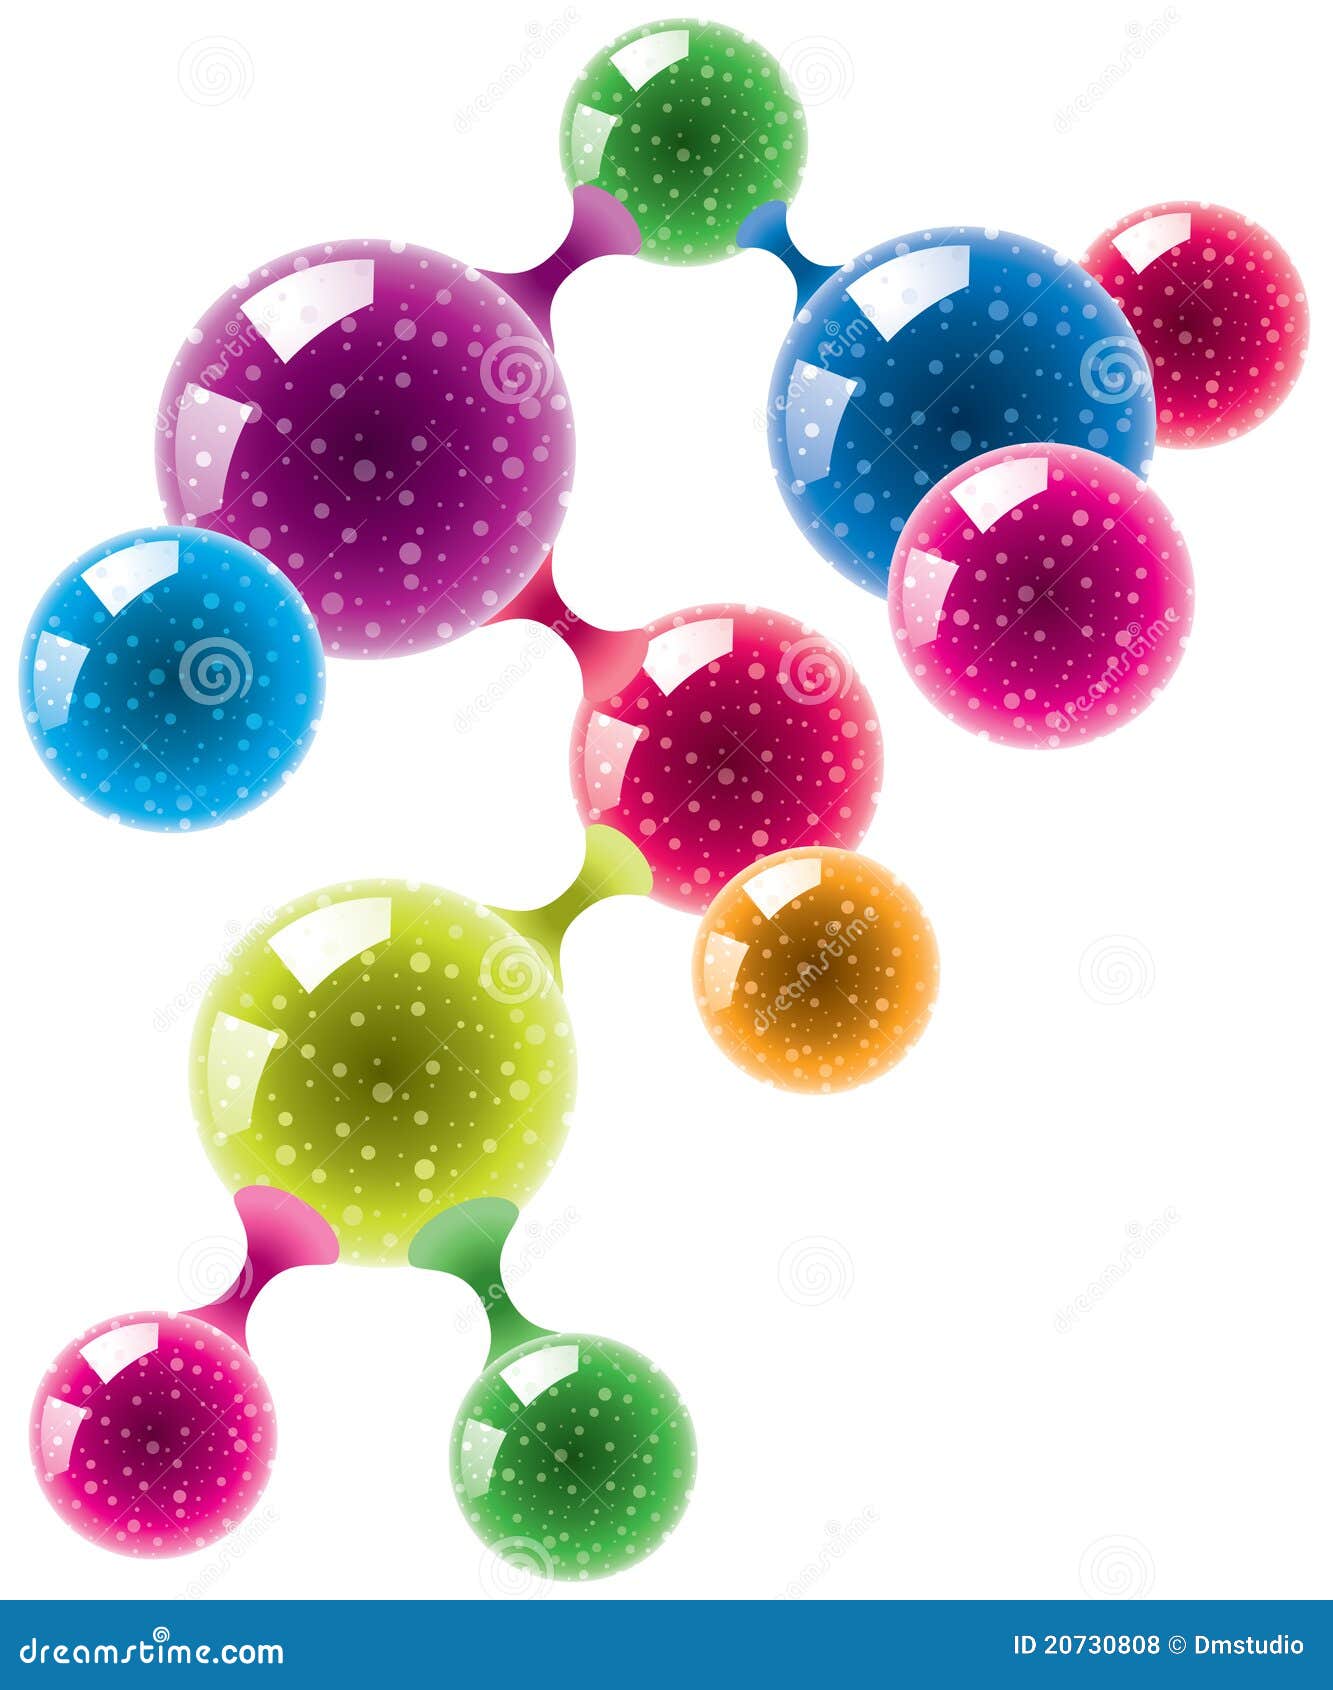 abstract molecule or microbe